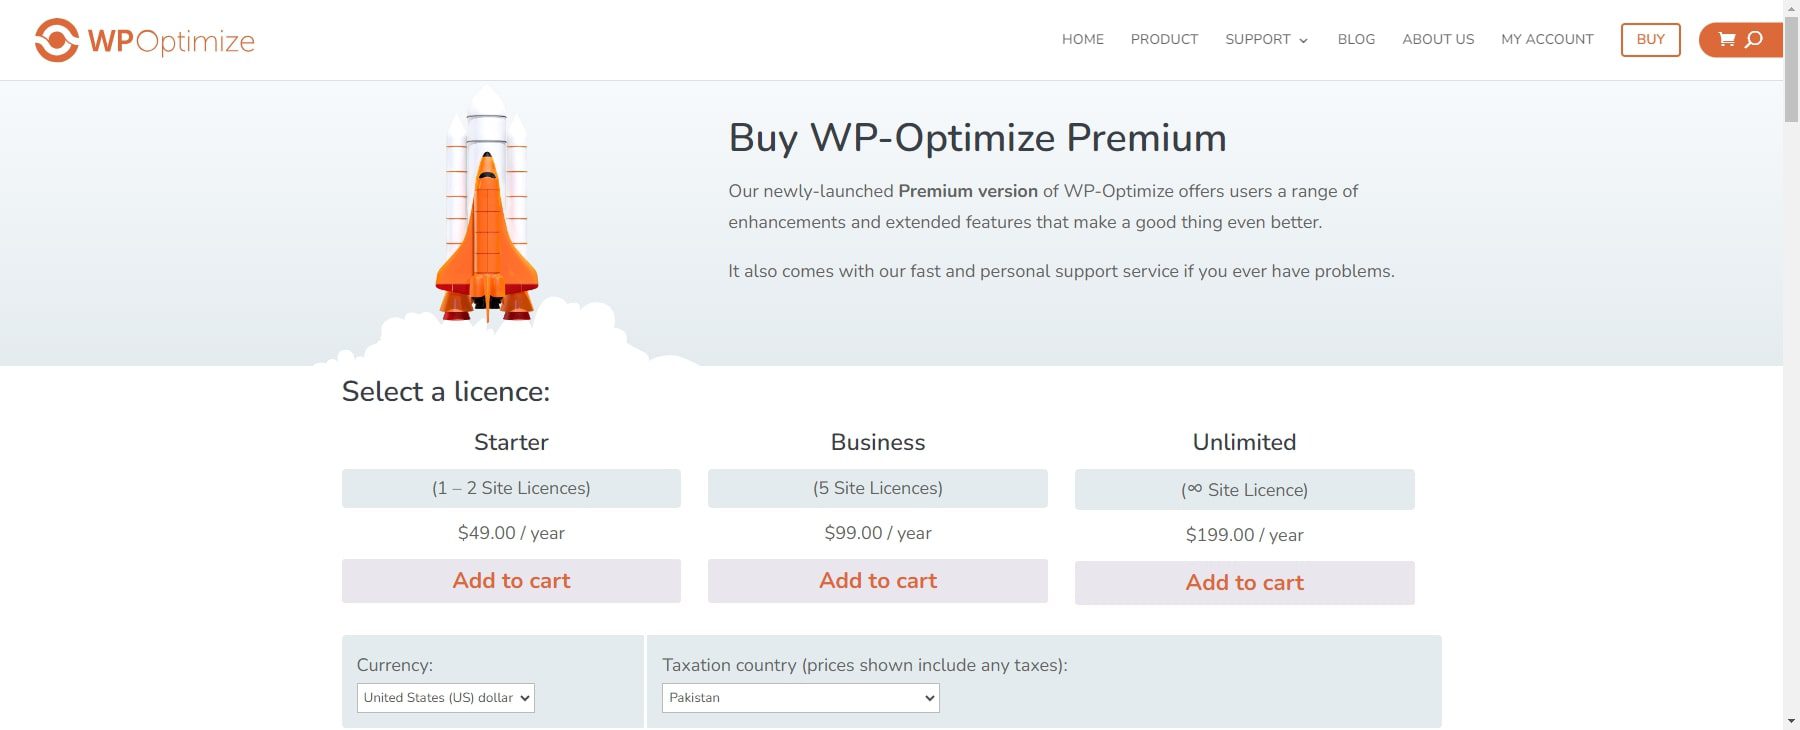 wo-optimize pricing